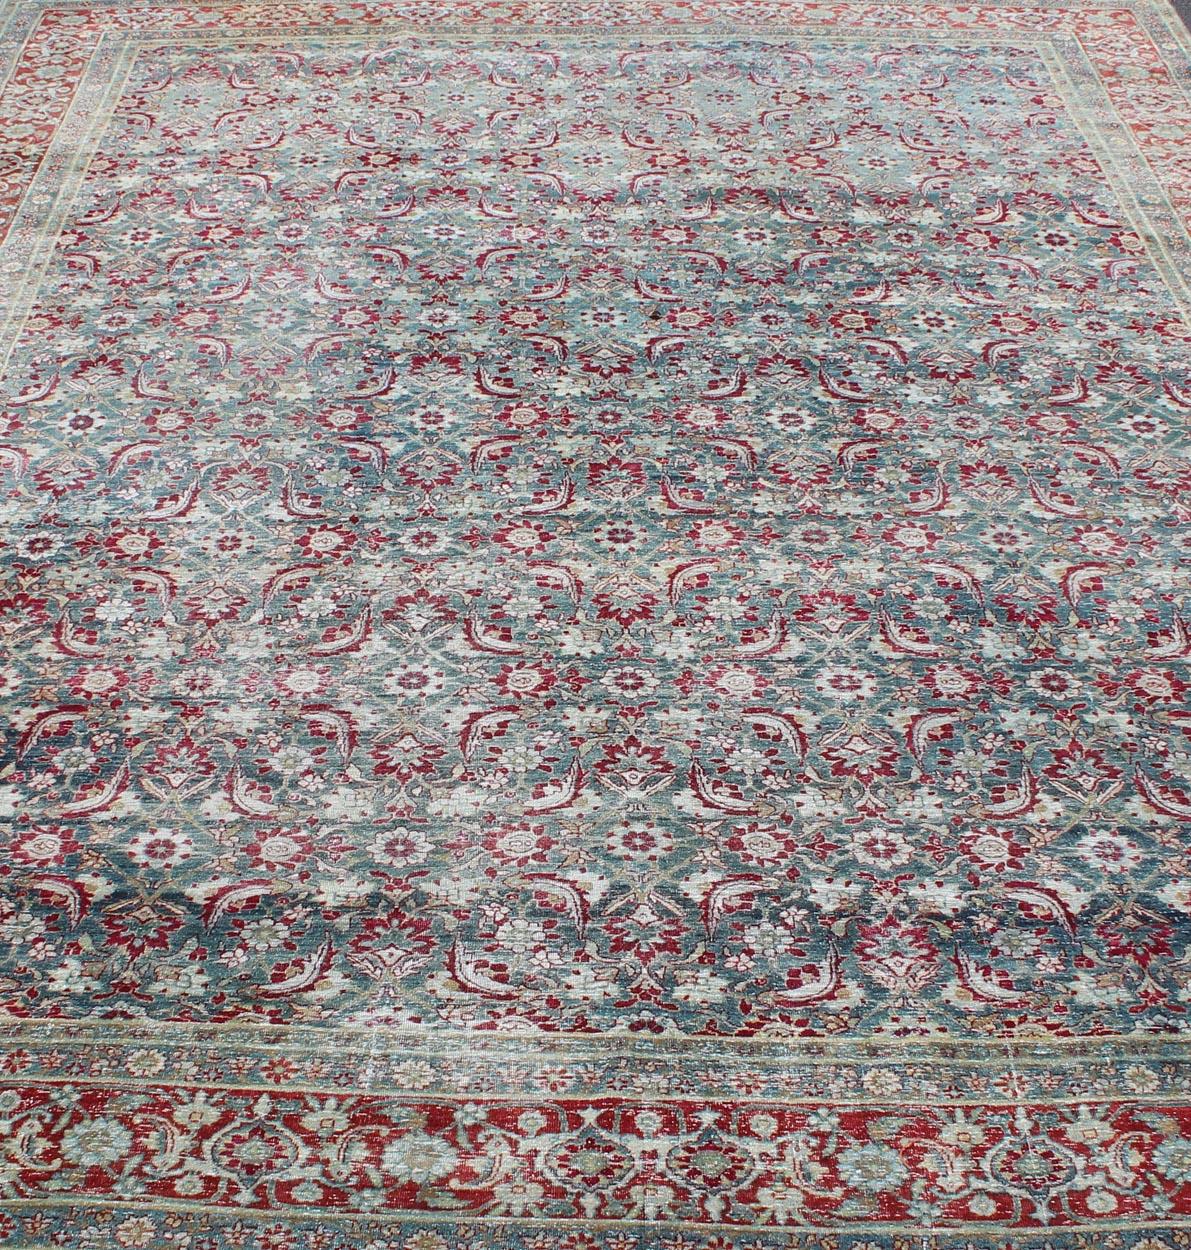 Antique Persian Yazd Rug with Floral-Geometric Design in Red and Blue For Sale 4